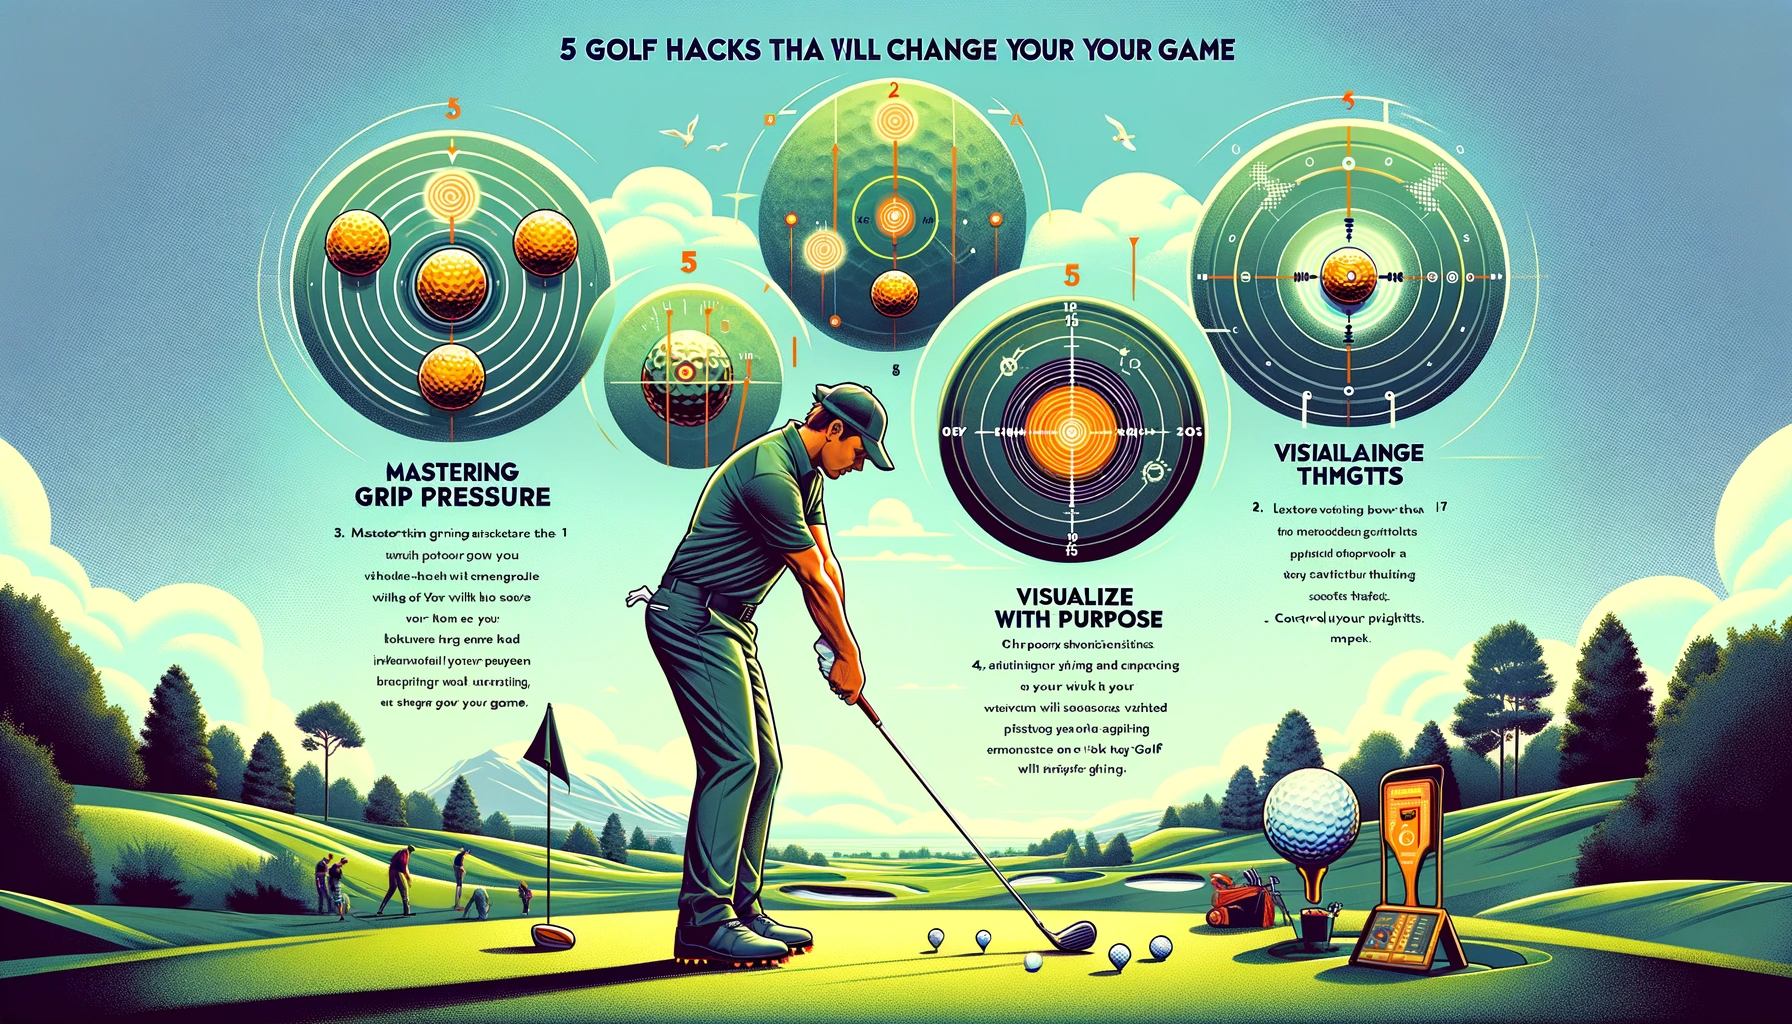 5 Golf Hacks That Will Change Your Game